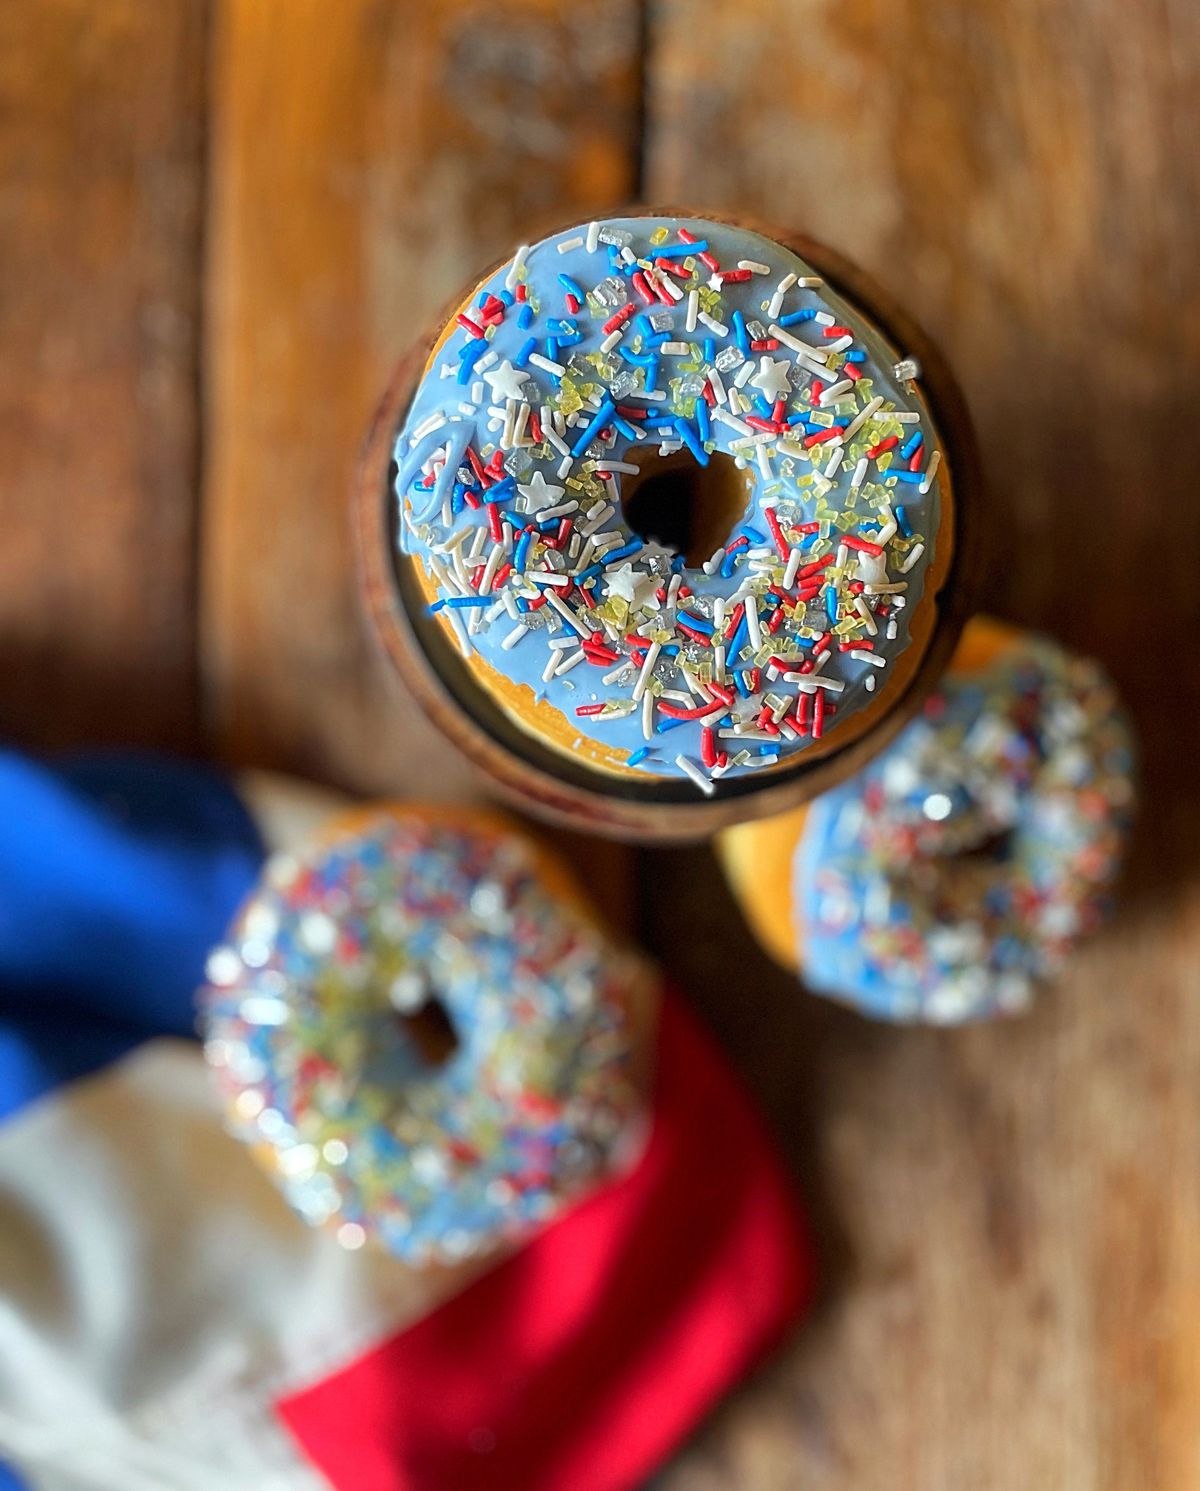 Elizabeth’s Counter is offering an Olympic Donut.